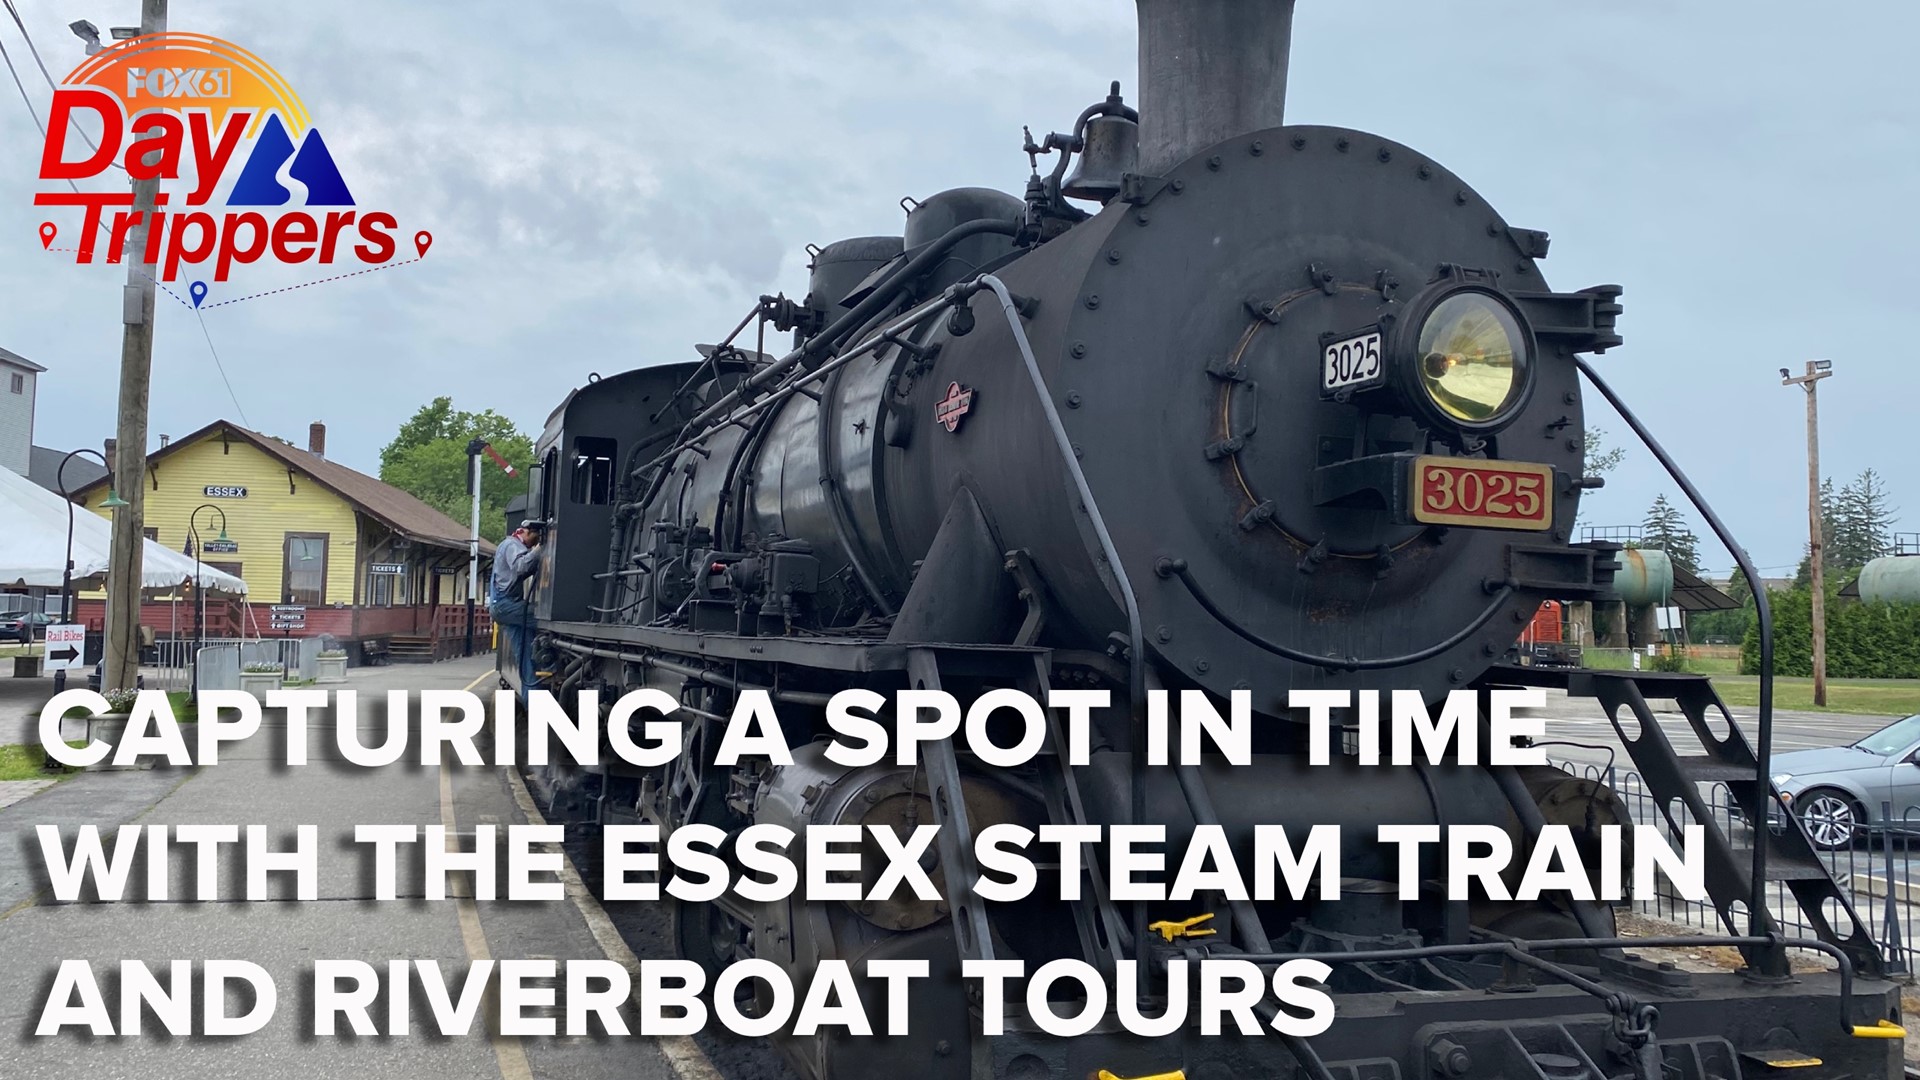 No longer constrained by COVID-19 precautions, the Essex Steam Train and Riverboat trips have taken off once again, and thousands have returned to ride the rails.